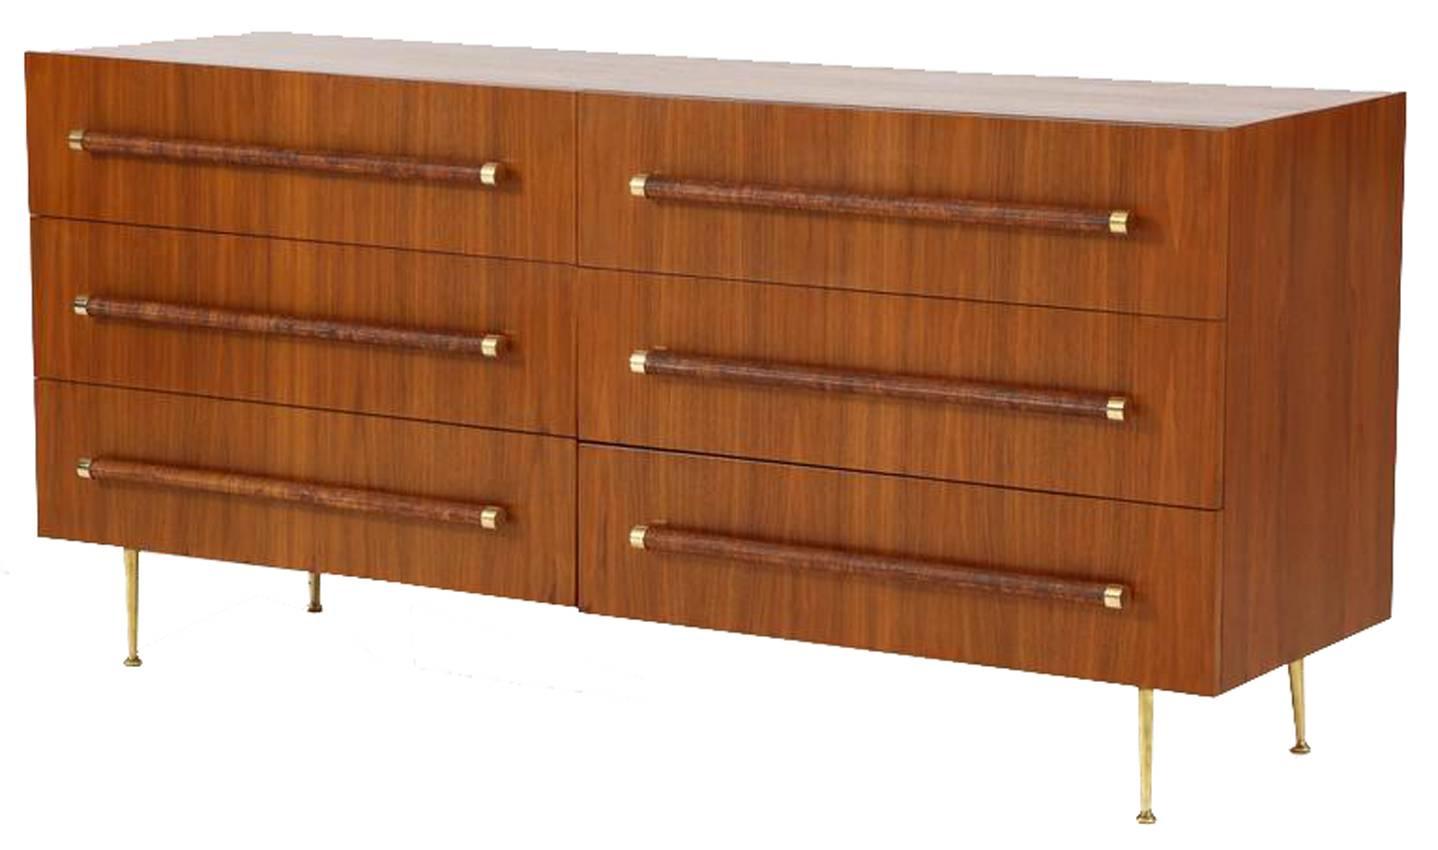 T.H. Robsjohn-Gibbings for Widdicomb six-drawer dresser, circa 1950. Fully restored walnut body featuring caned wrapped drawer pulls with polished brass detailing and legs.